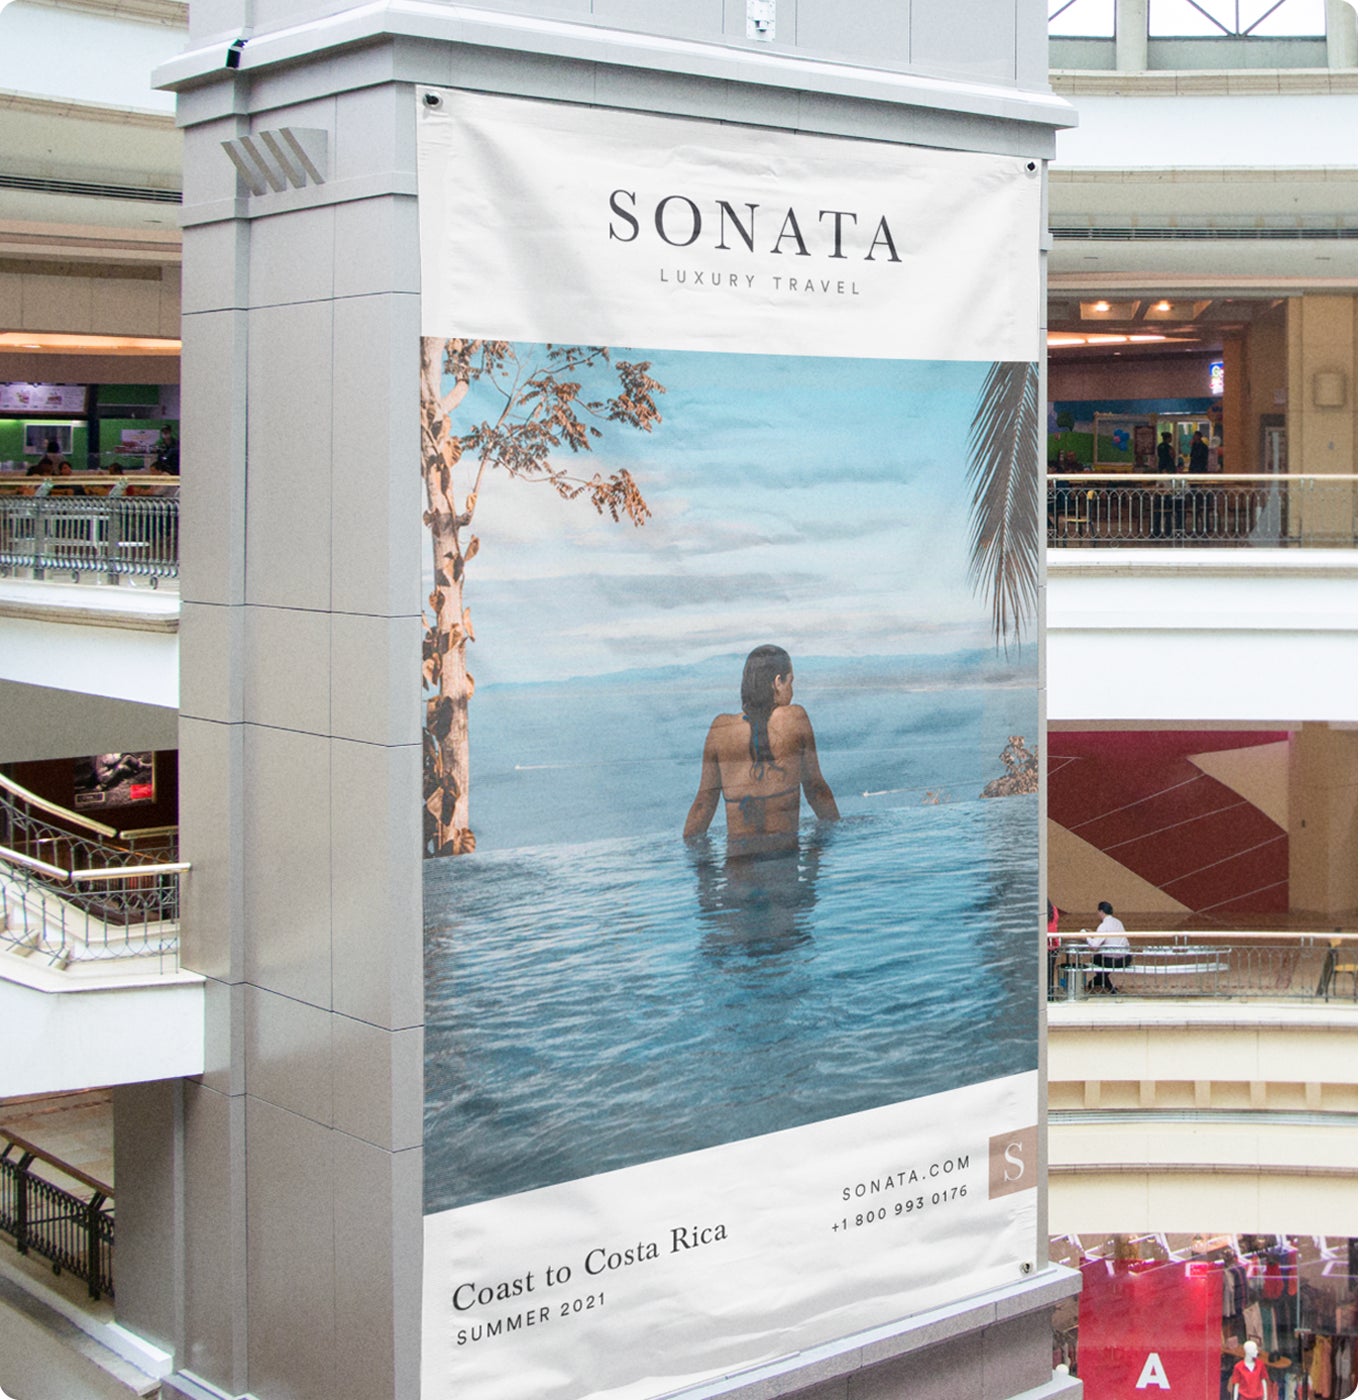 A banner for Sonata brand on the side of a shopping center